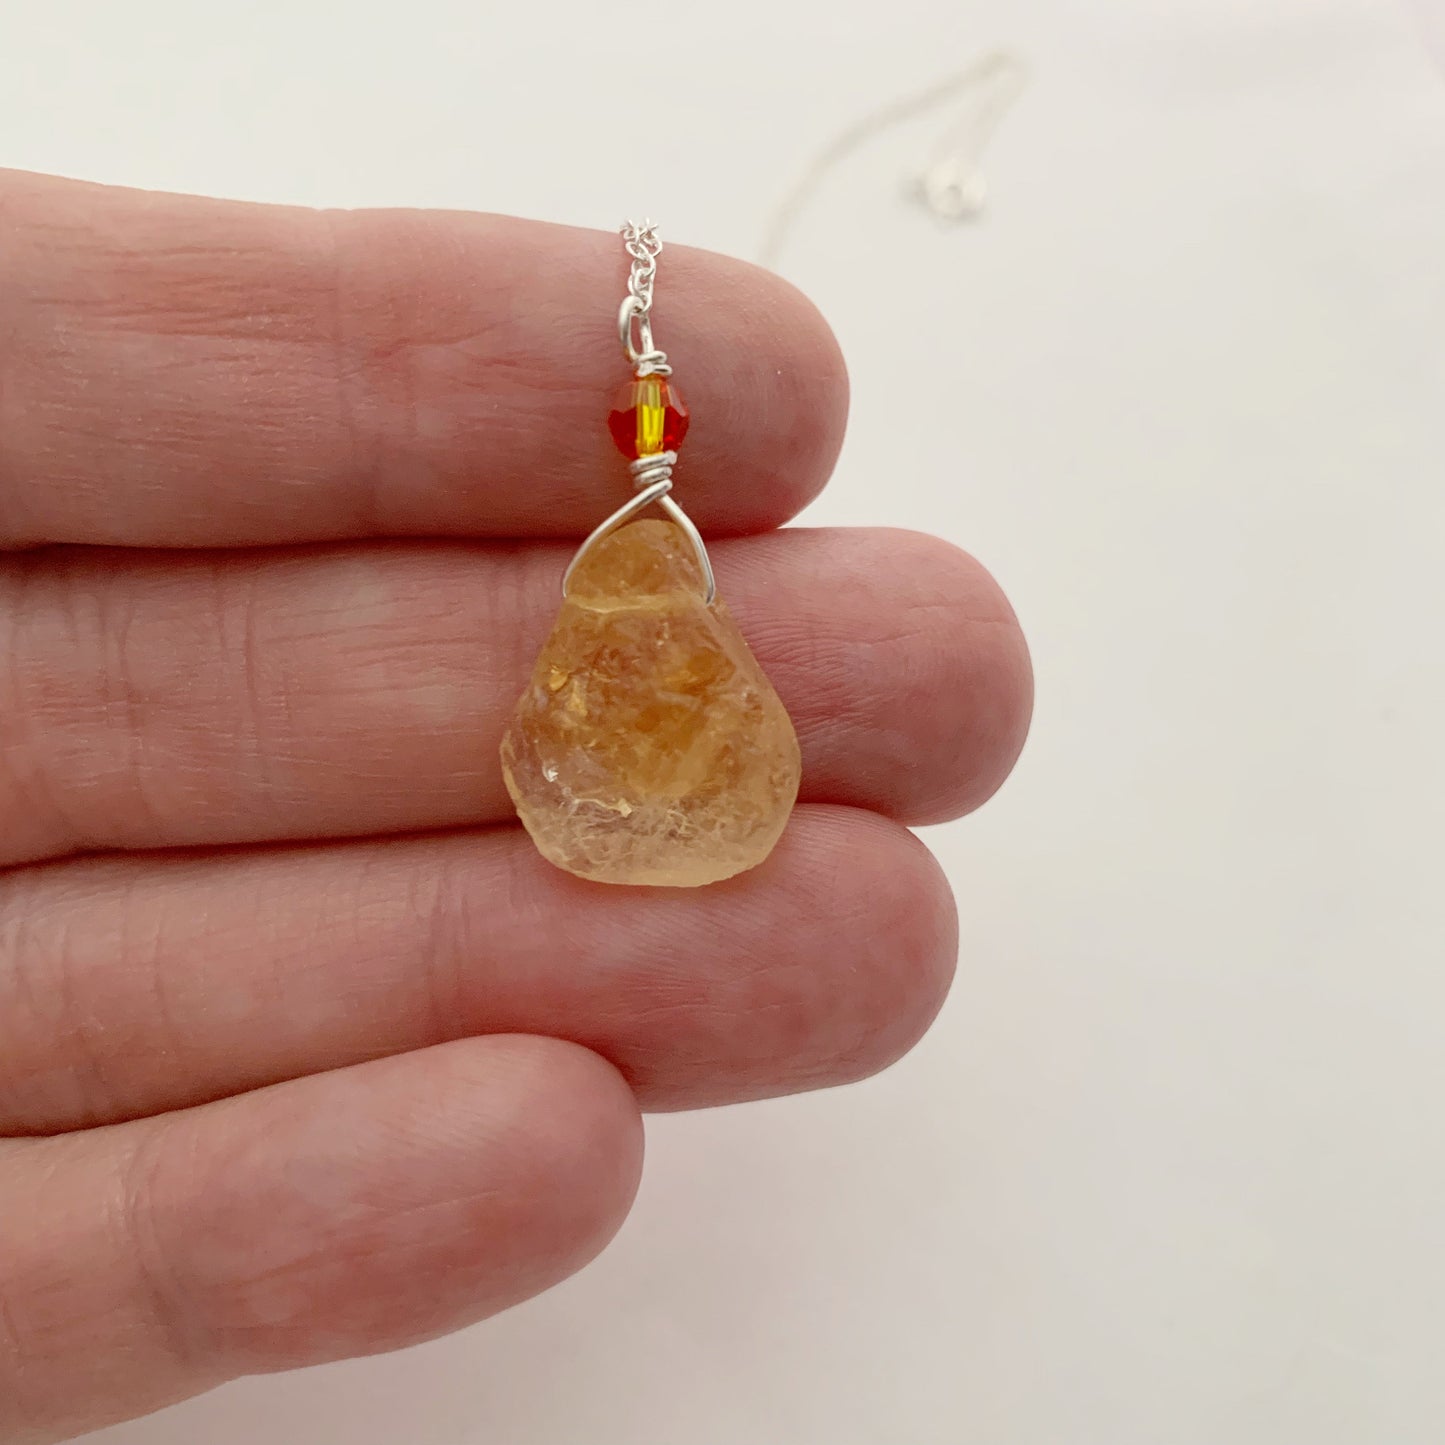 I AM Awakening the Light Within / Citrine / Simple Reminder Necklaces / Sterling Silver / Intention Necklaces